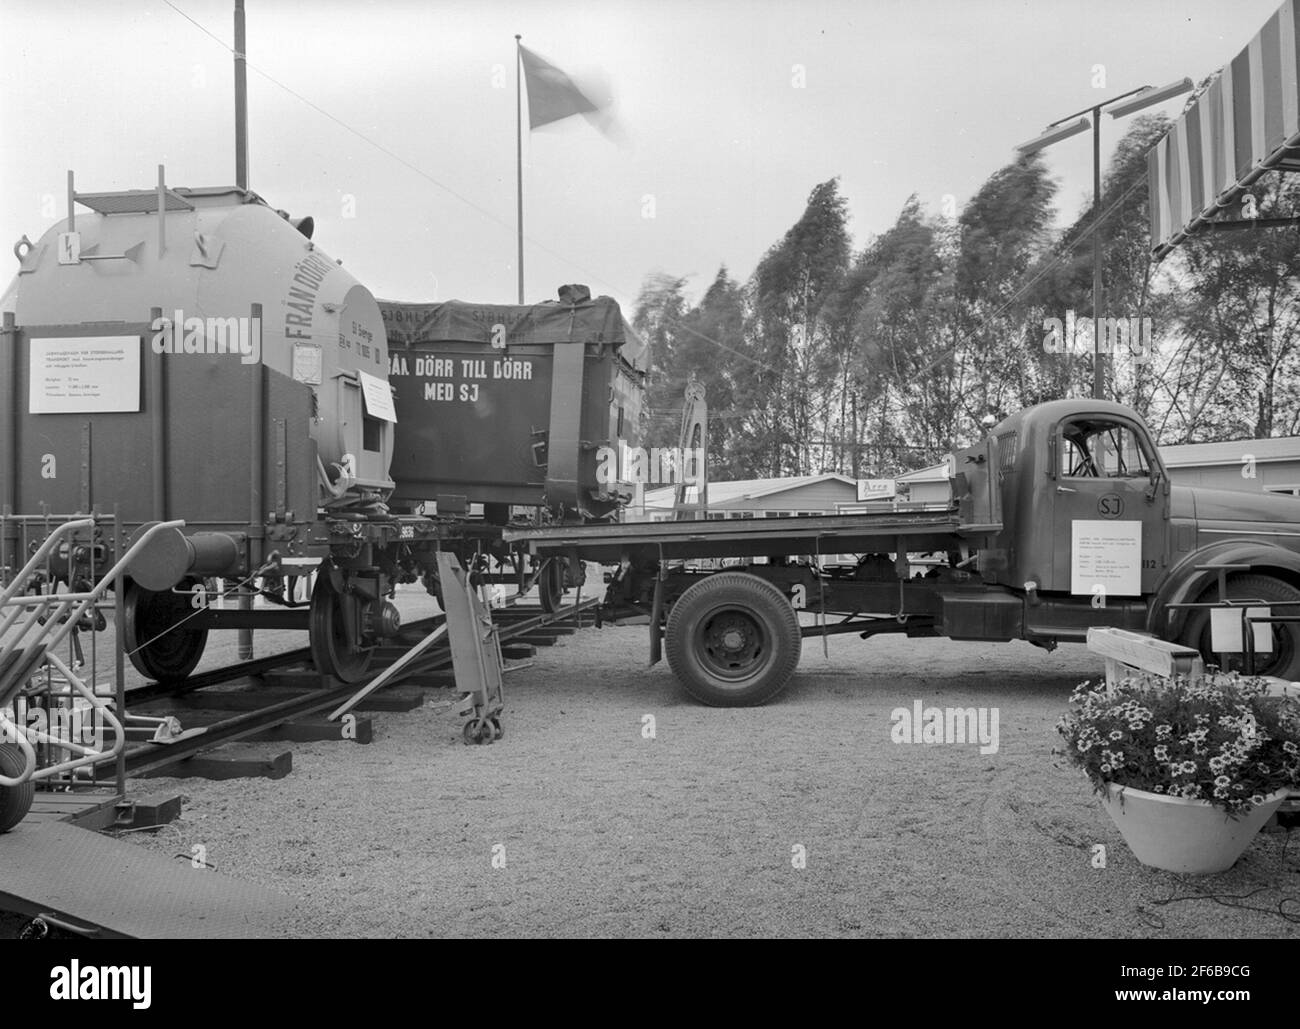 S: t Eriksmässan 1954. Advertising from door to door with SJ. Loading containers from the freight truck. Stock Photo